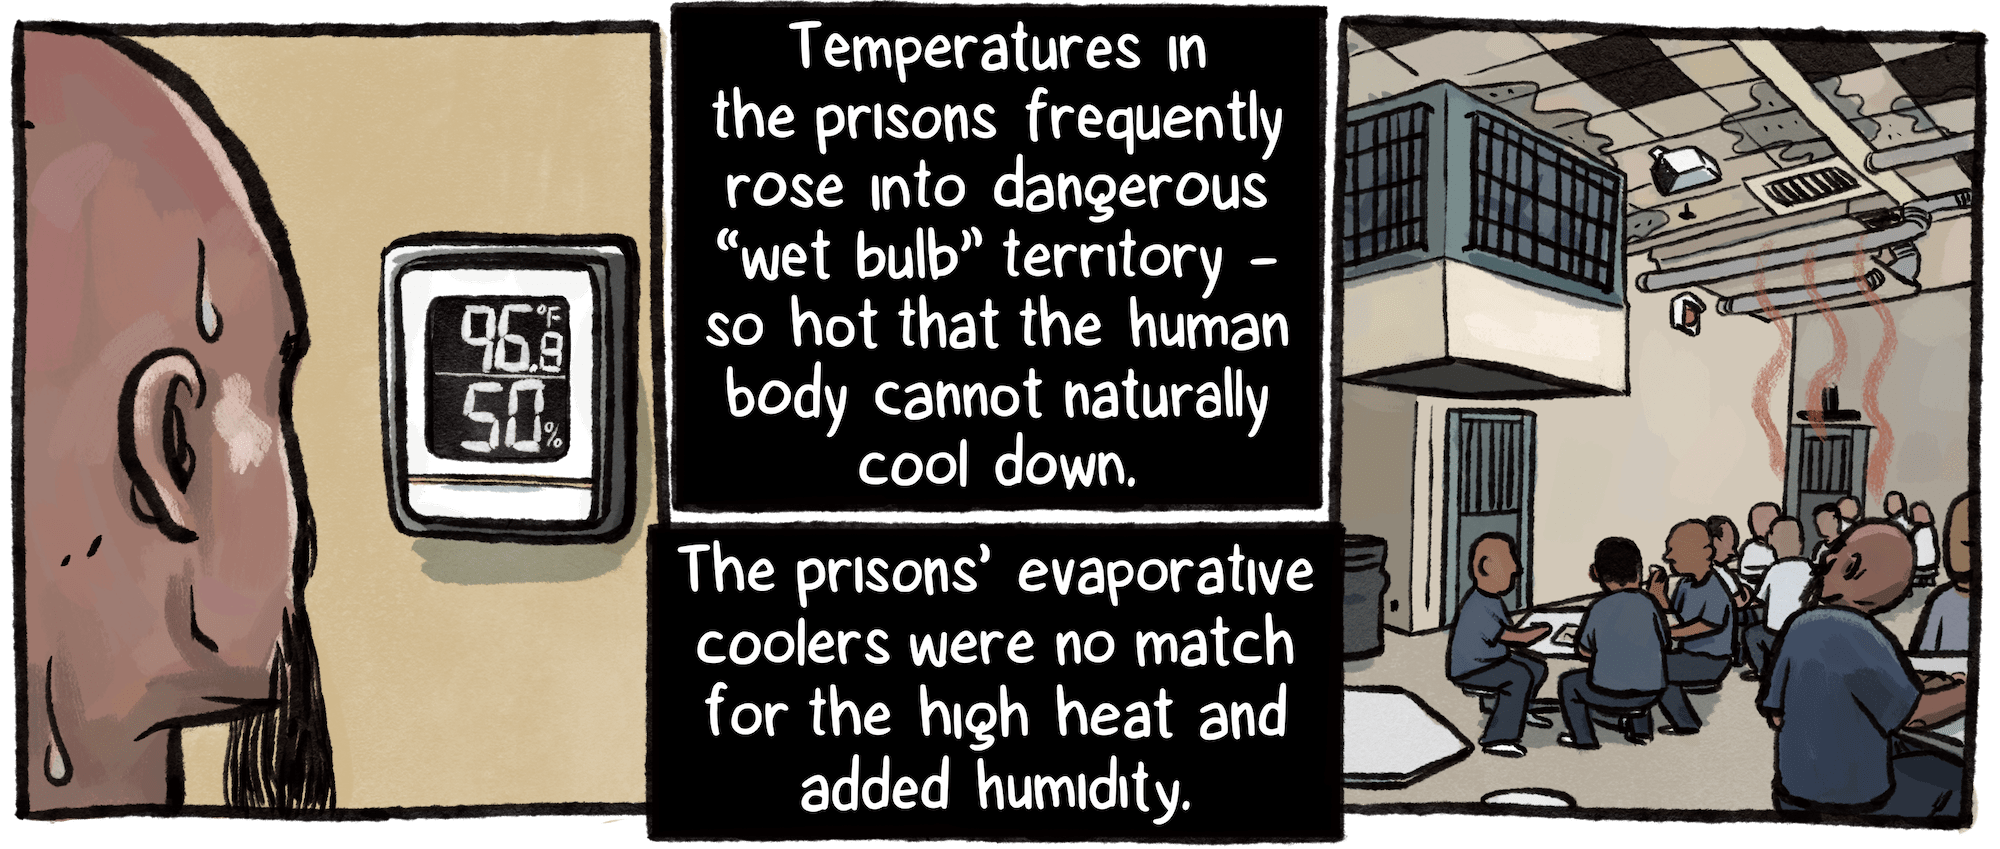 The prisons’ evaporative coolers were no match for the high heat and humidity. A man of medium to dark skin tone looks at a wall thermostat as a bead of sweat rolls down his bald head. A cooler hangs above a room filled with people in prison uniforms sitting at tables.